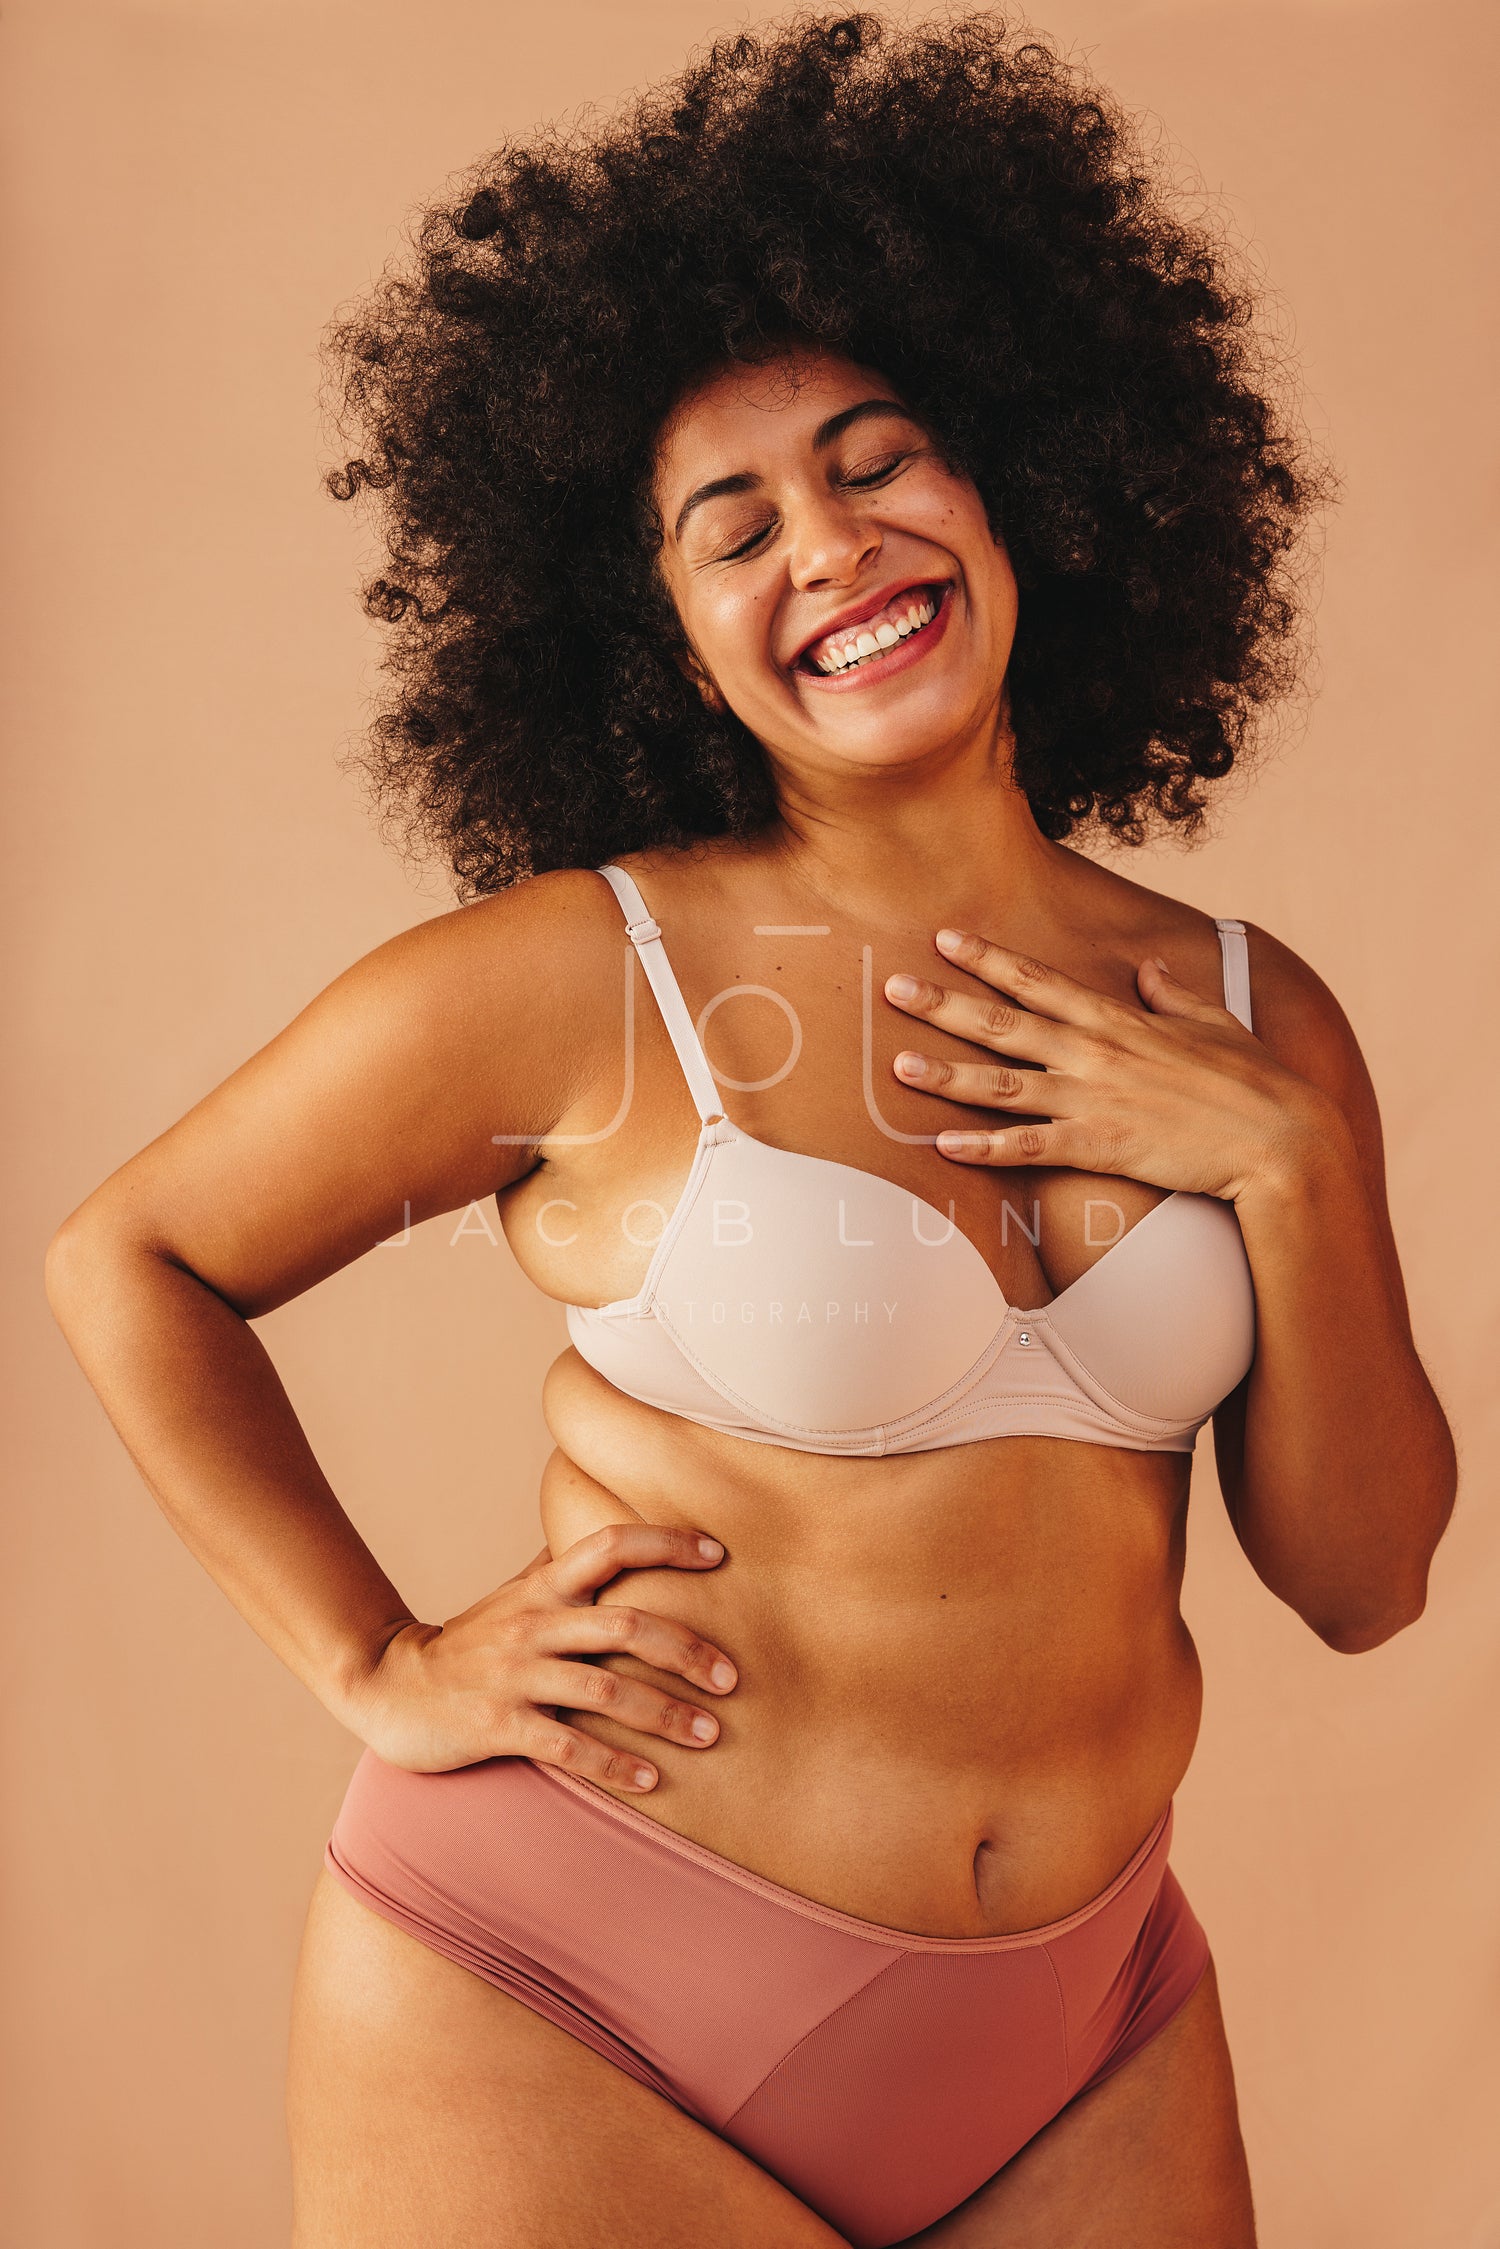 Beautiful plus size woman smiling happily in underwear – Jacob